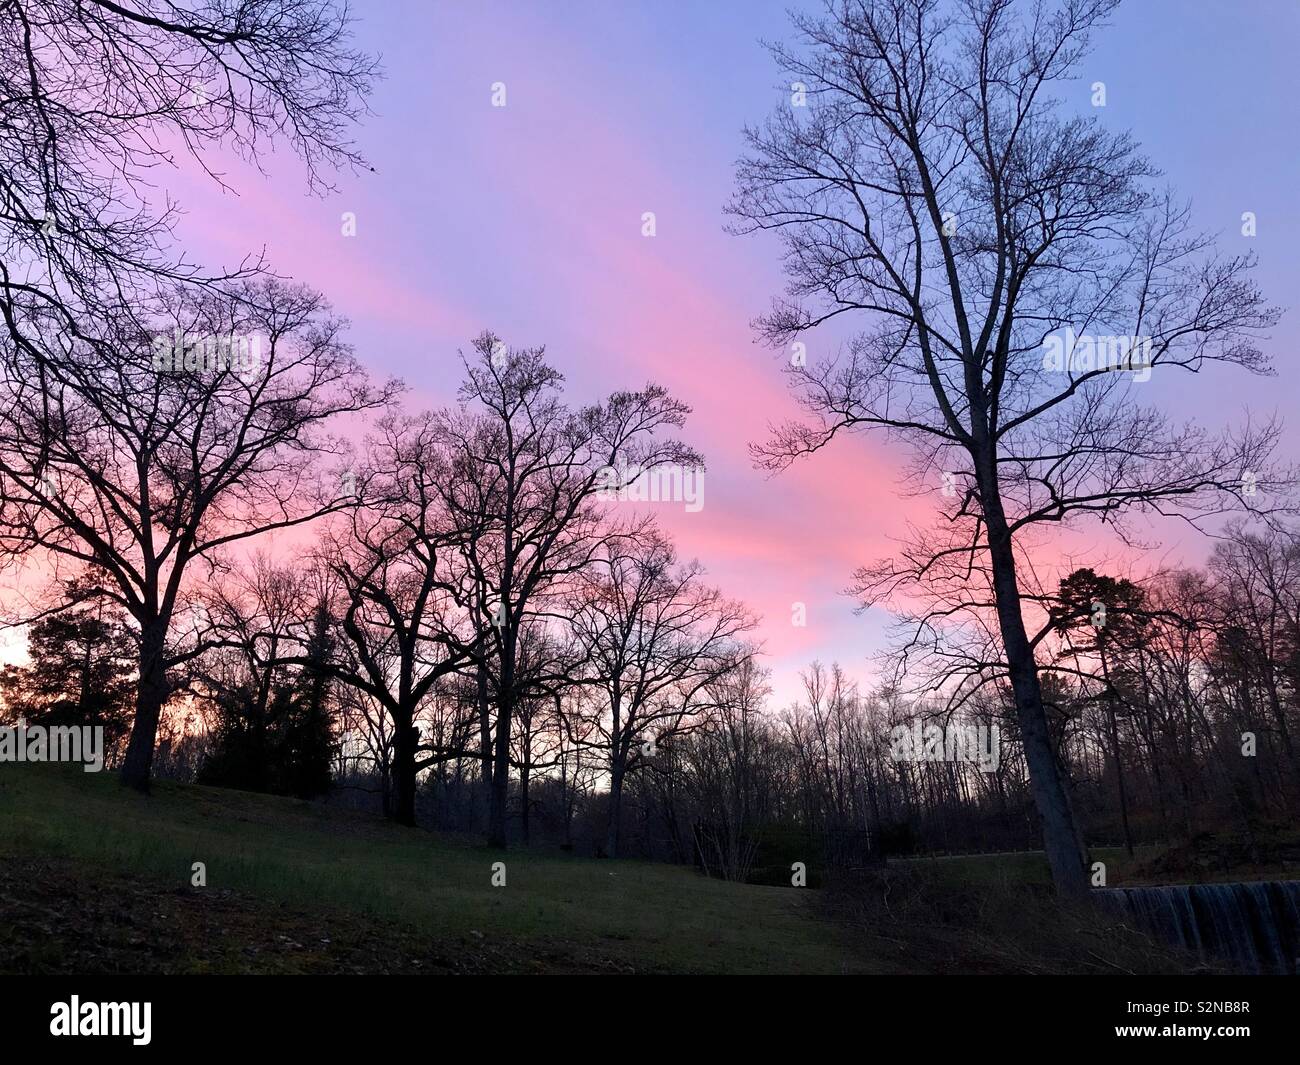 Bright pink sunset behind tree silhouettes in early spring Stock Photo